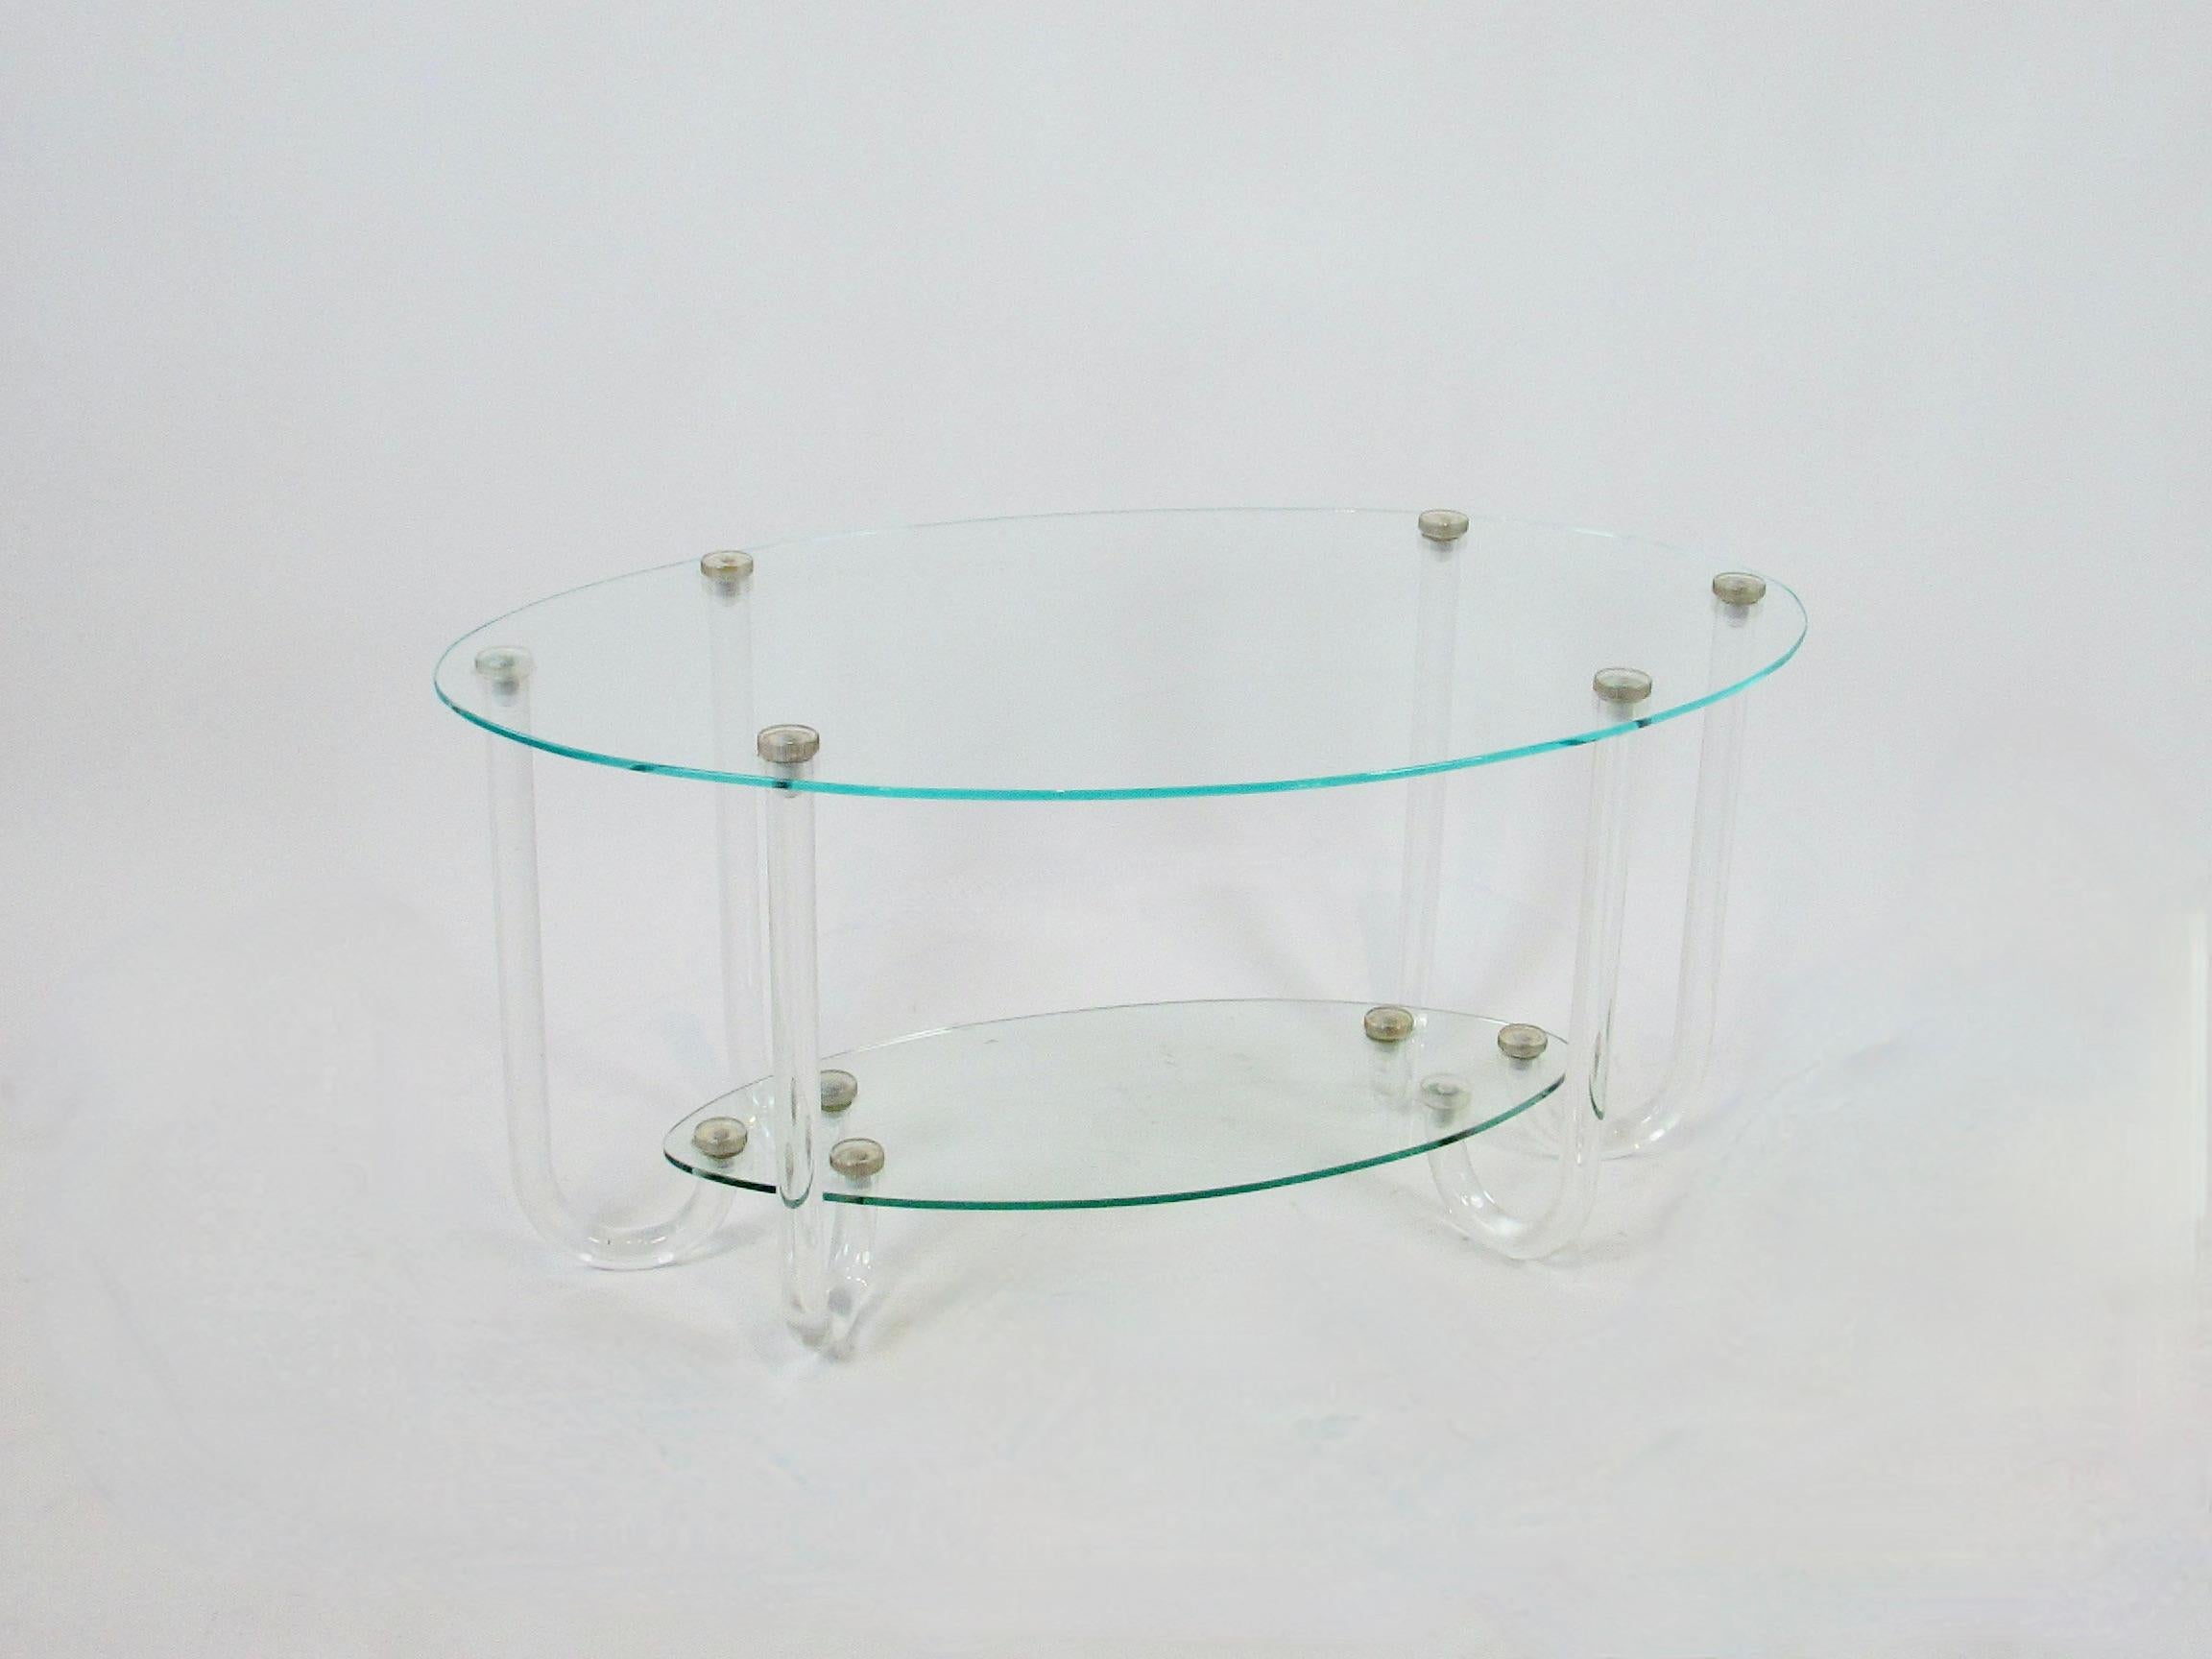 Two tier oval top ocasional table on six curved lucite legs . To my surprise the top tier appears to be acrylic . Originally thought it to be glass with the green edge matching the lower tier which is glass . Top is immaculate with no scratch or